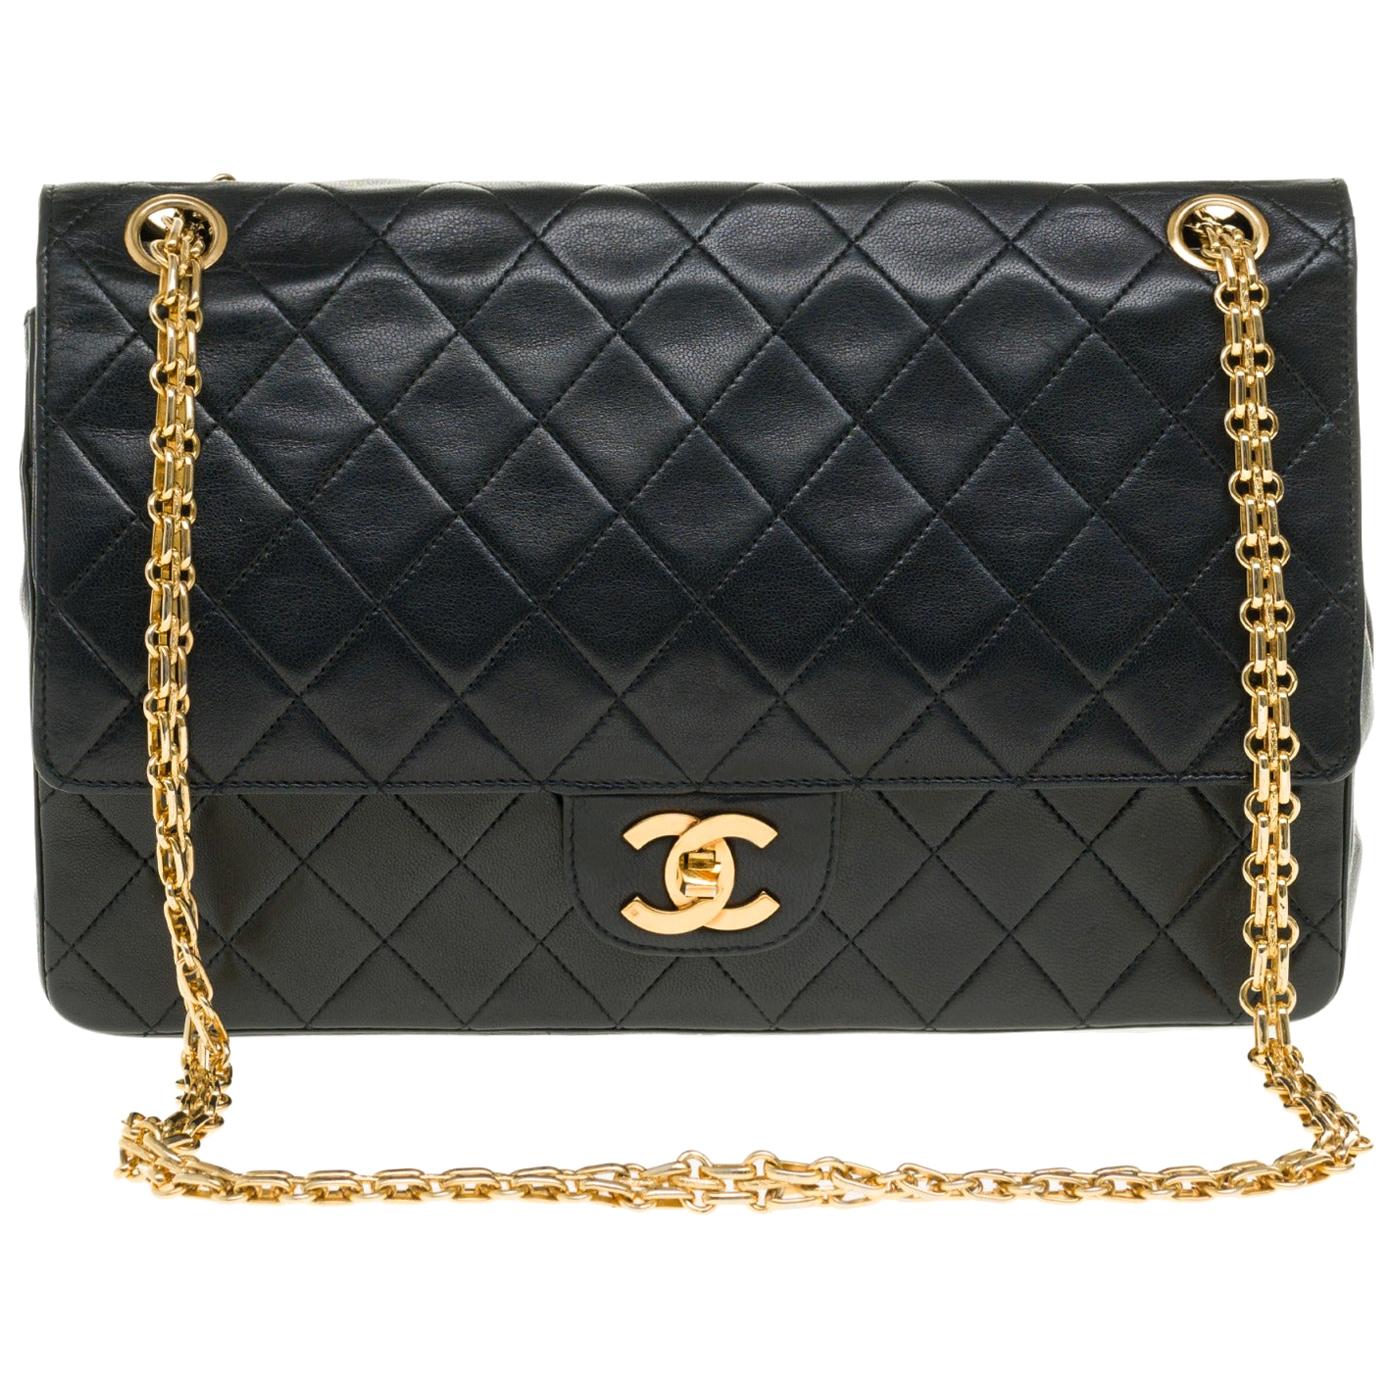 Stunning Chanel Classic shoulder bag in black quilted lambskin and gold hardware